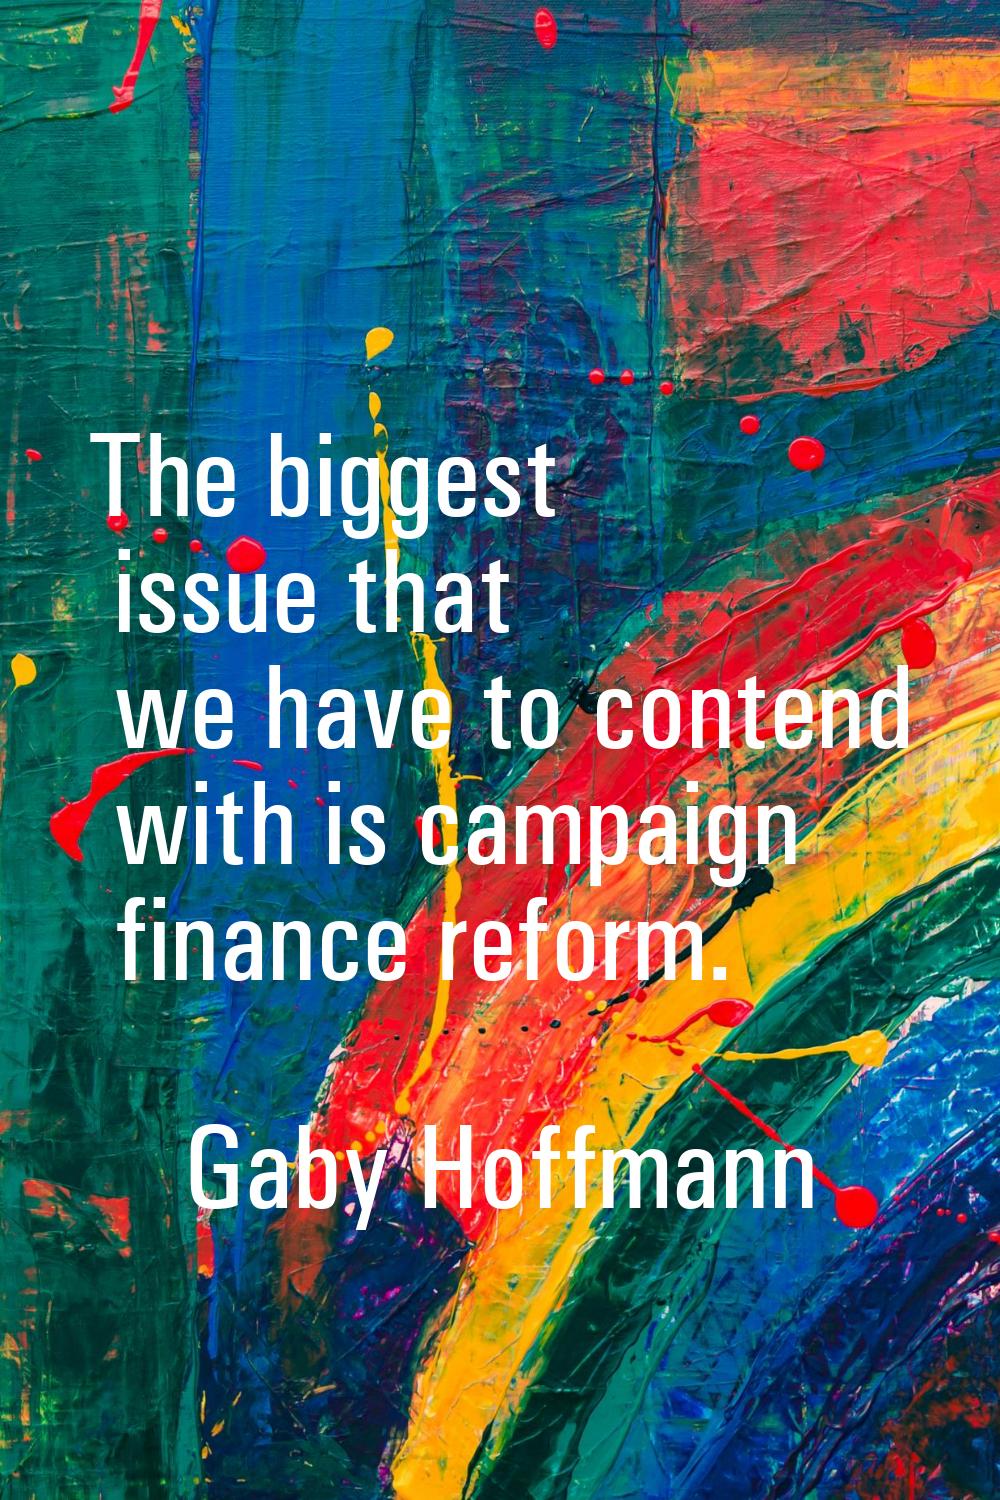 The biggest issue that we have to contend with is campaign finance reform.